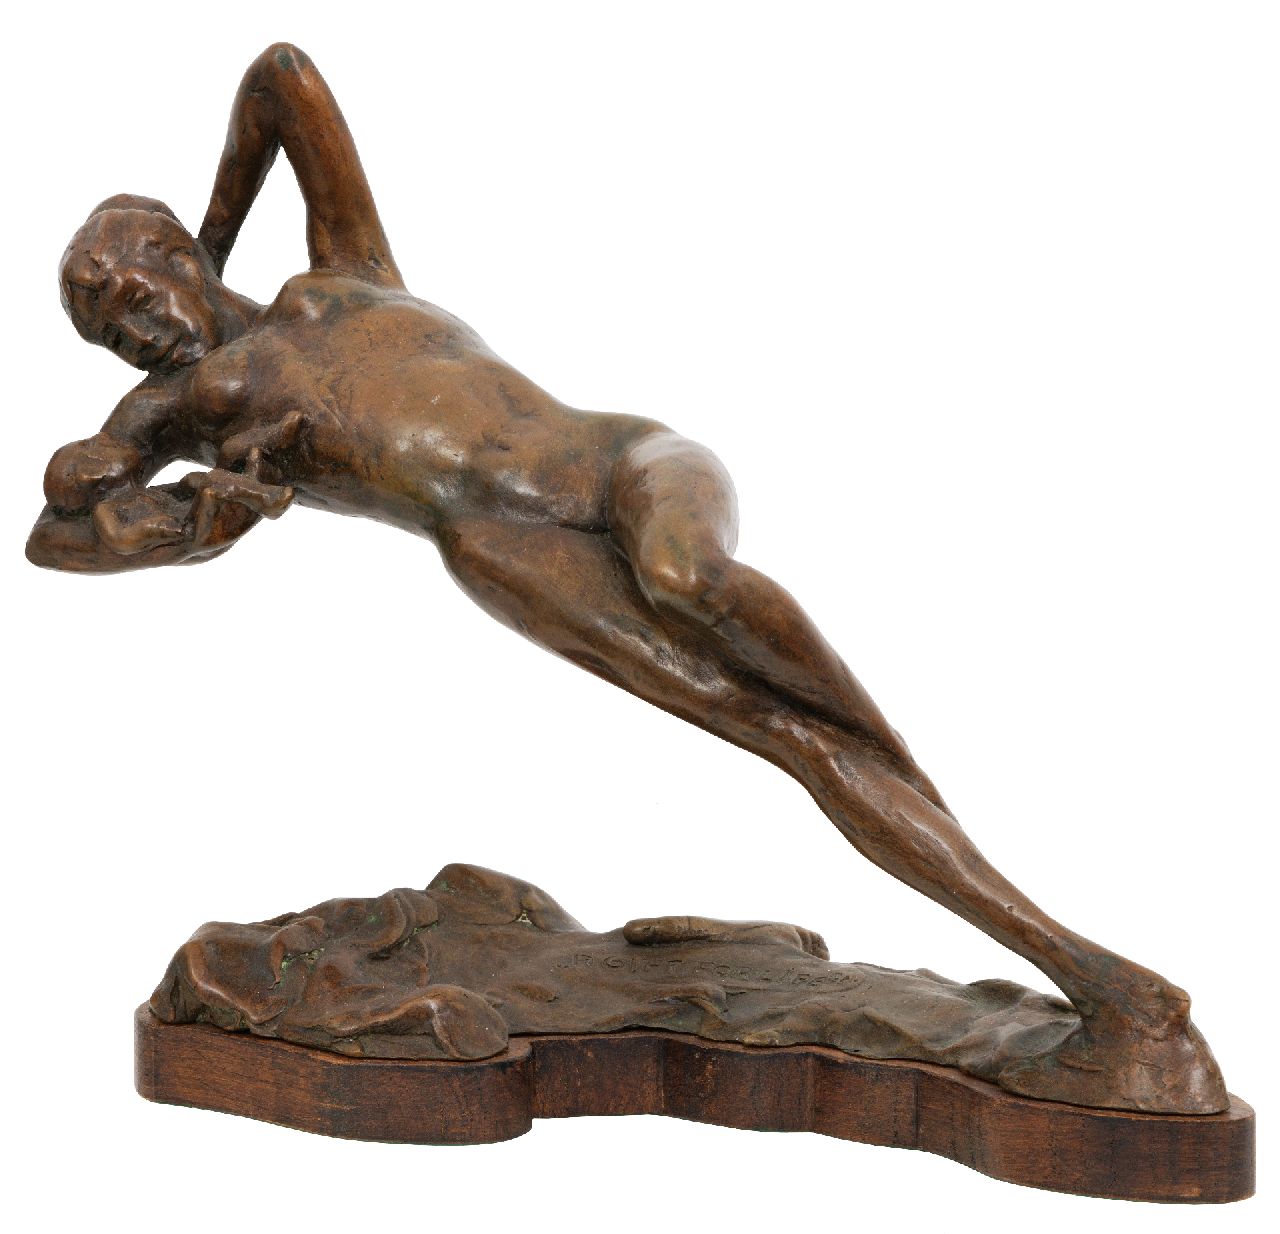 Verkade K.  | Korstiaan 'Kees' Verkade | Sculptures and objects offered for sale | A gift for life, bronze 26.5 x 30.0 cm, signed on the base and dated 2010